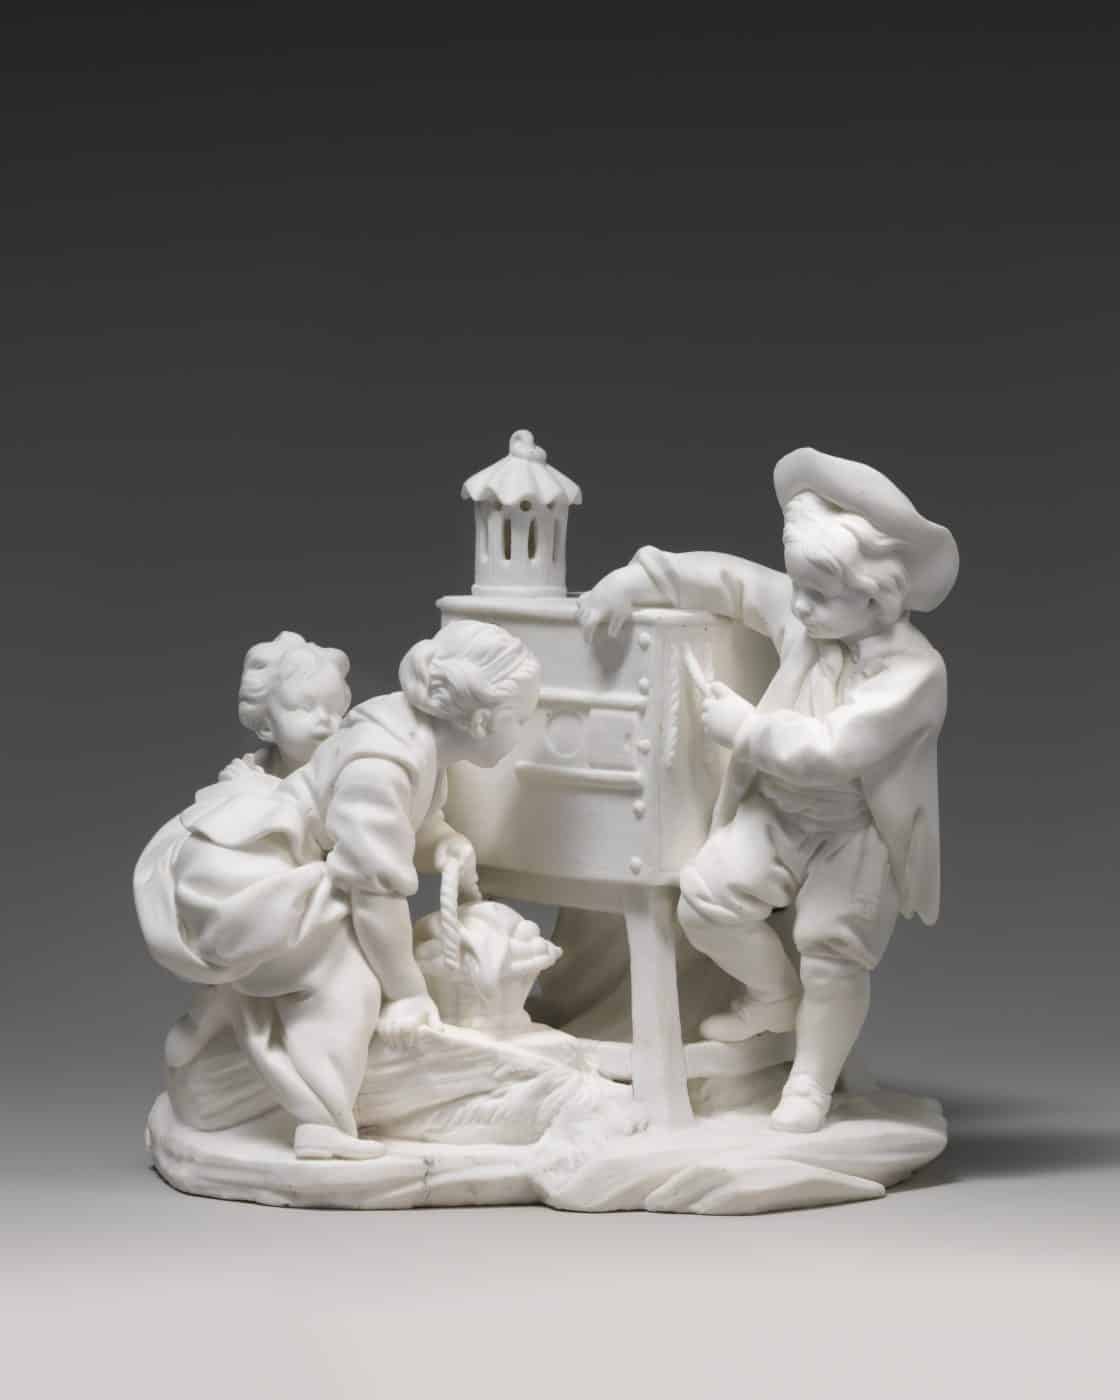 A ca. 1760 porcelain figurine, produced in the Sèvres manufactory, outside Paris, shows two girls viewing a magic lantern